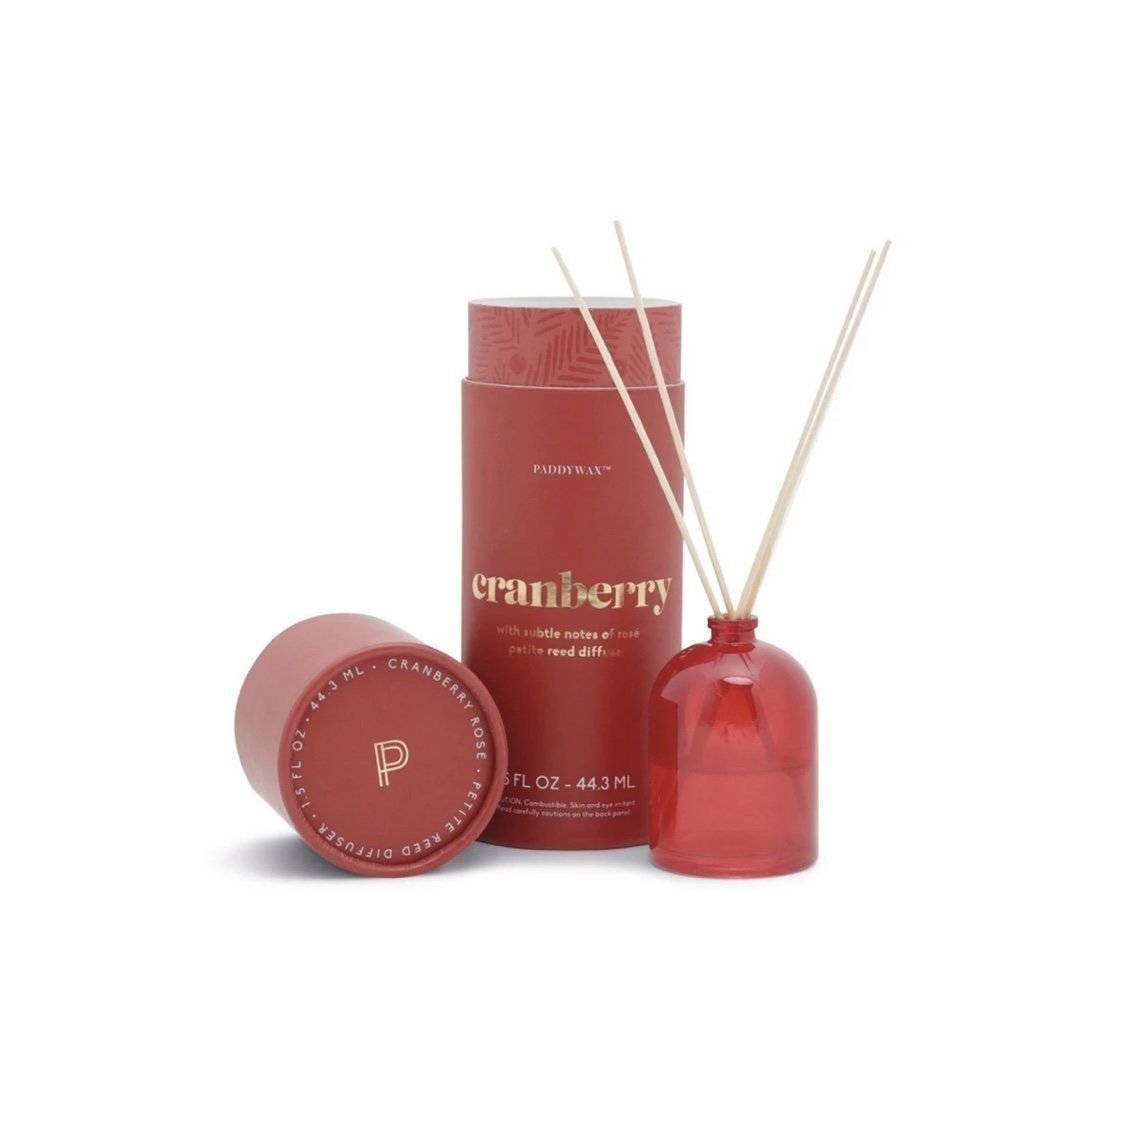 Petite Reed Diffuser Paddywax Cranberry 